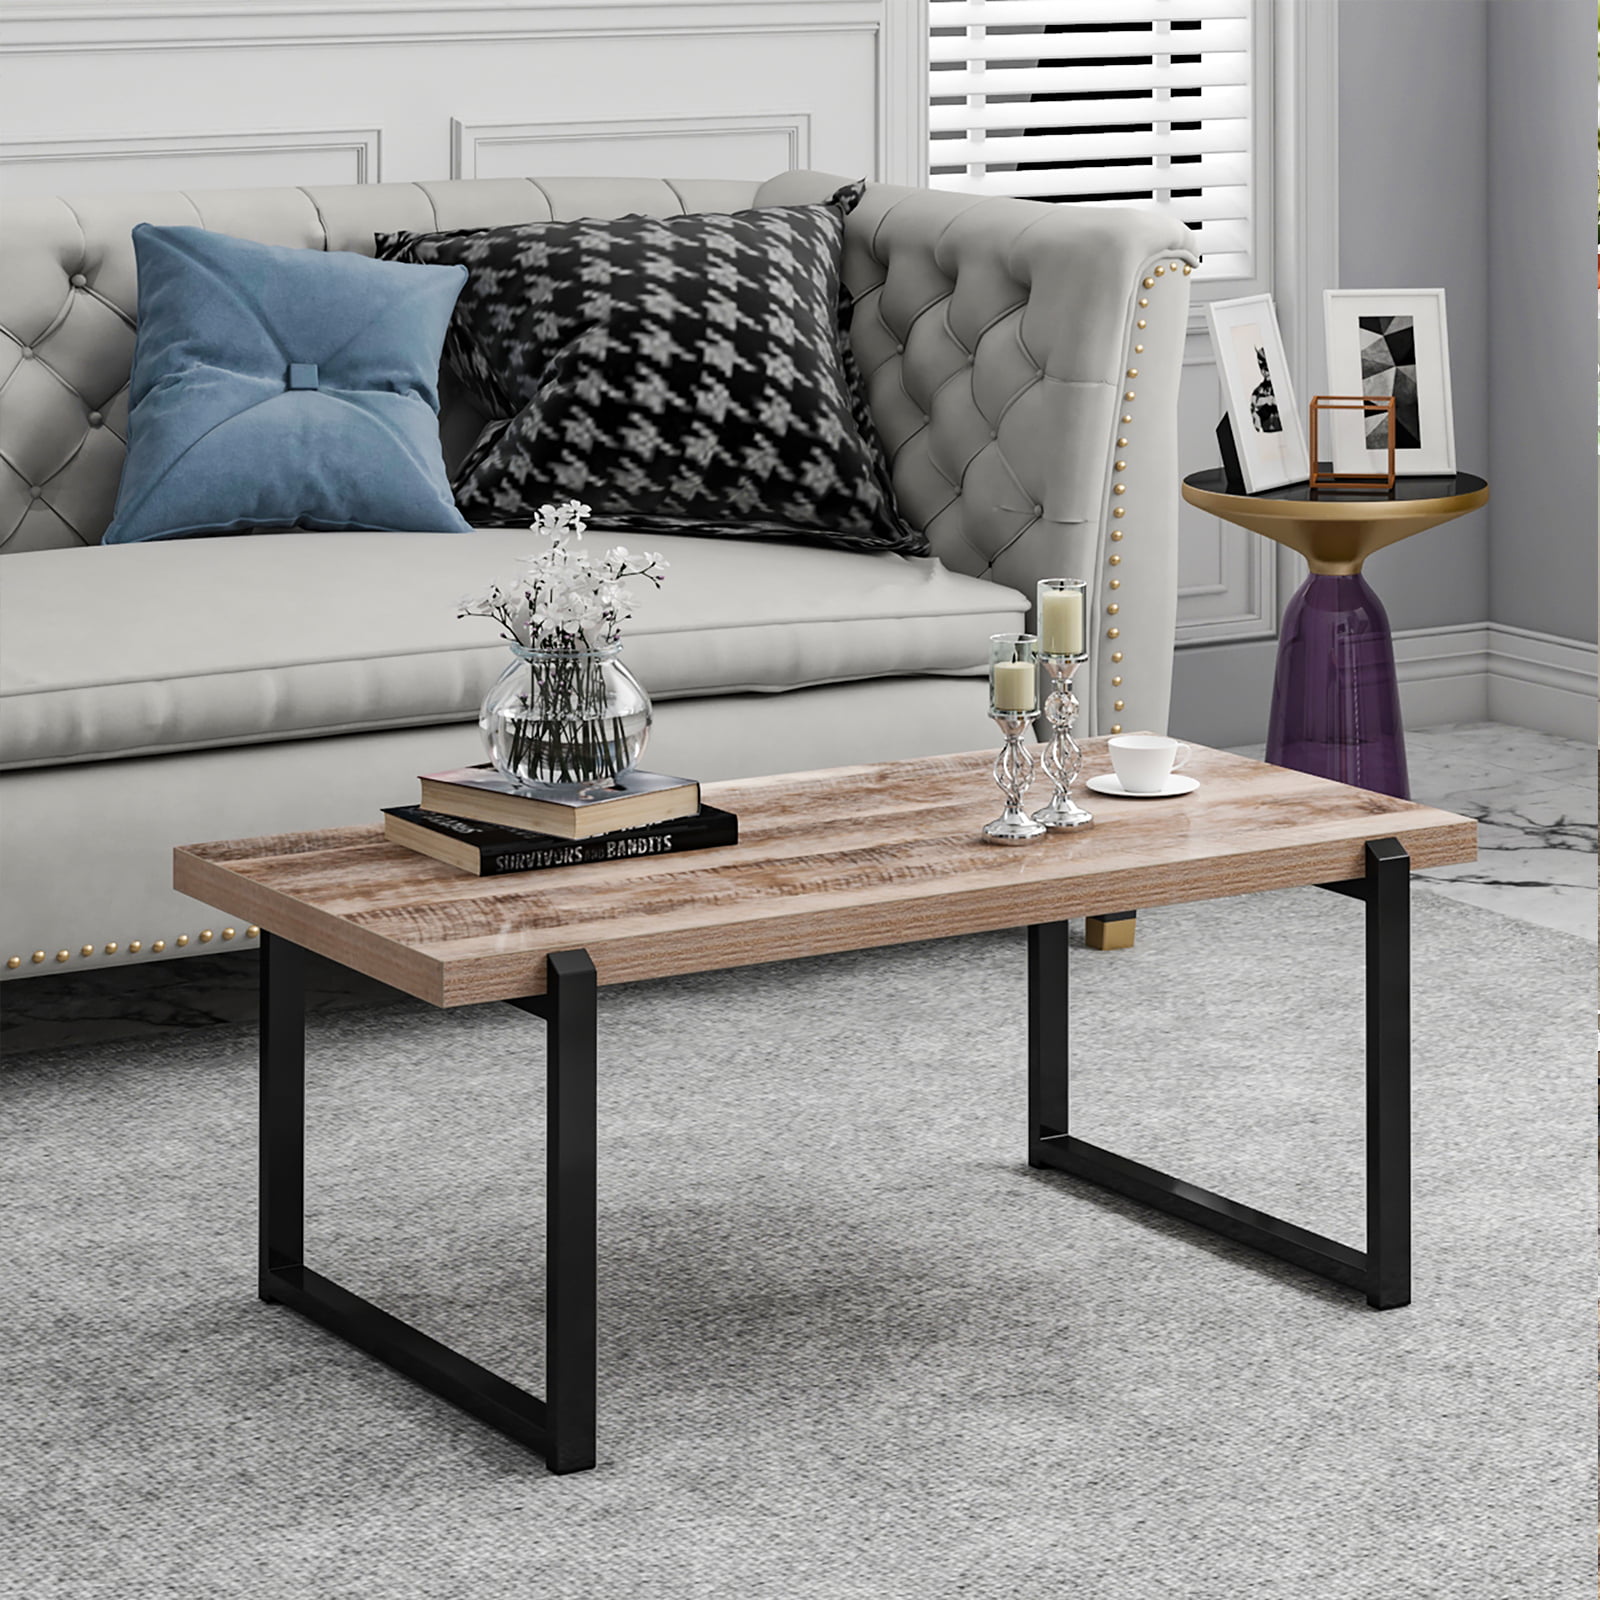 Home Rectangular Cocktail Coffee Table Metal Frame Room Furniture White/Grey US 